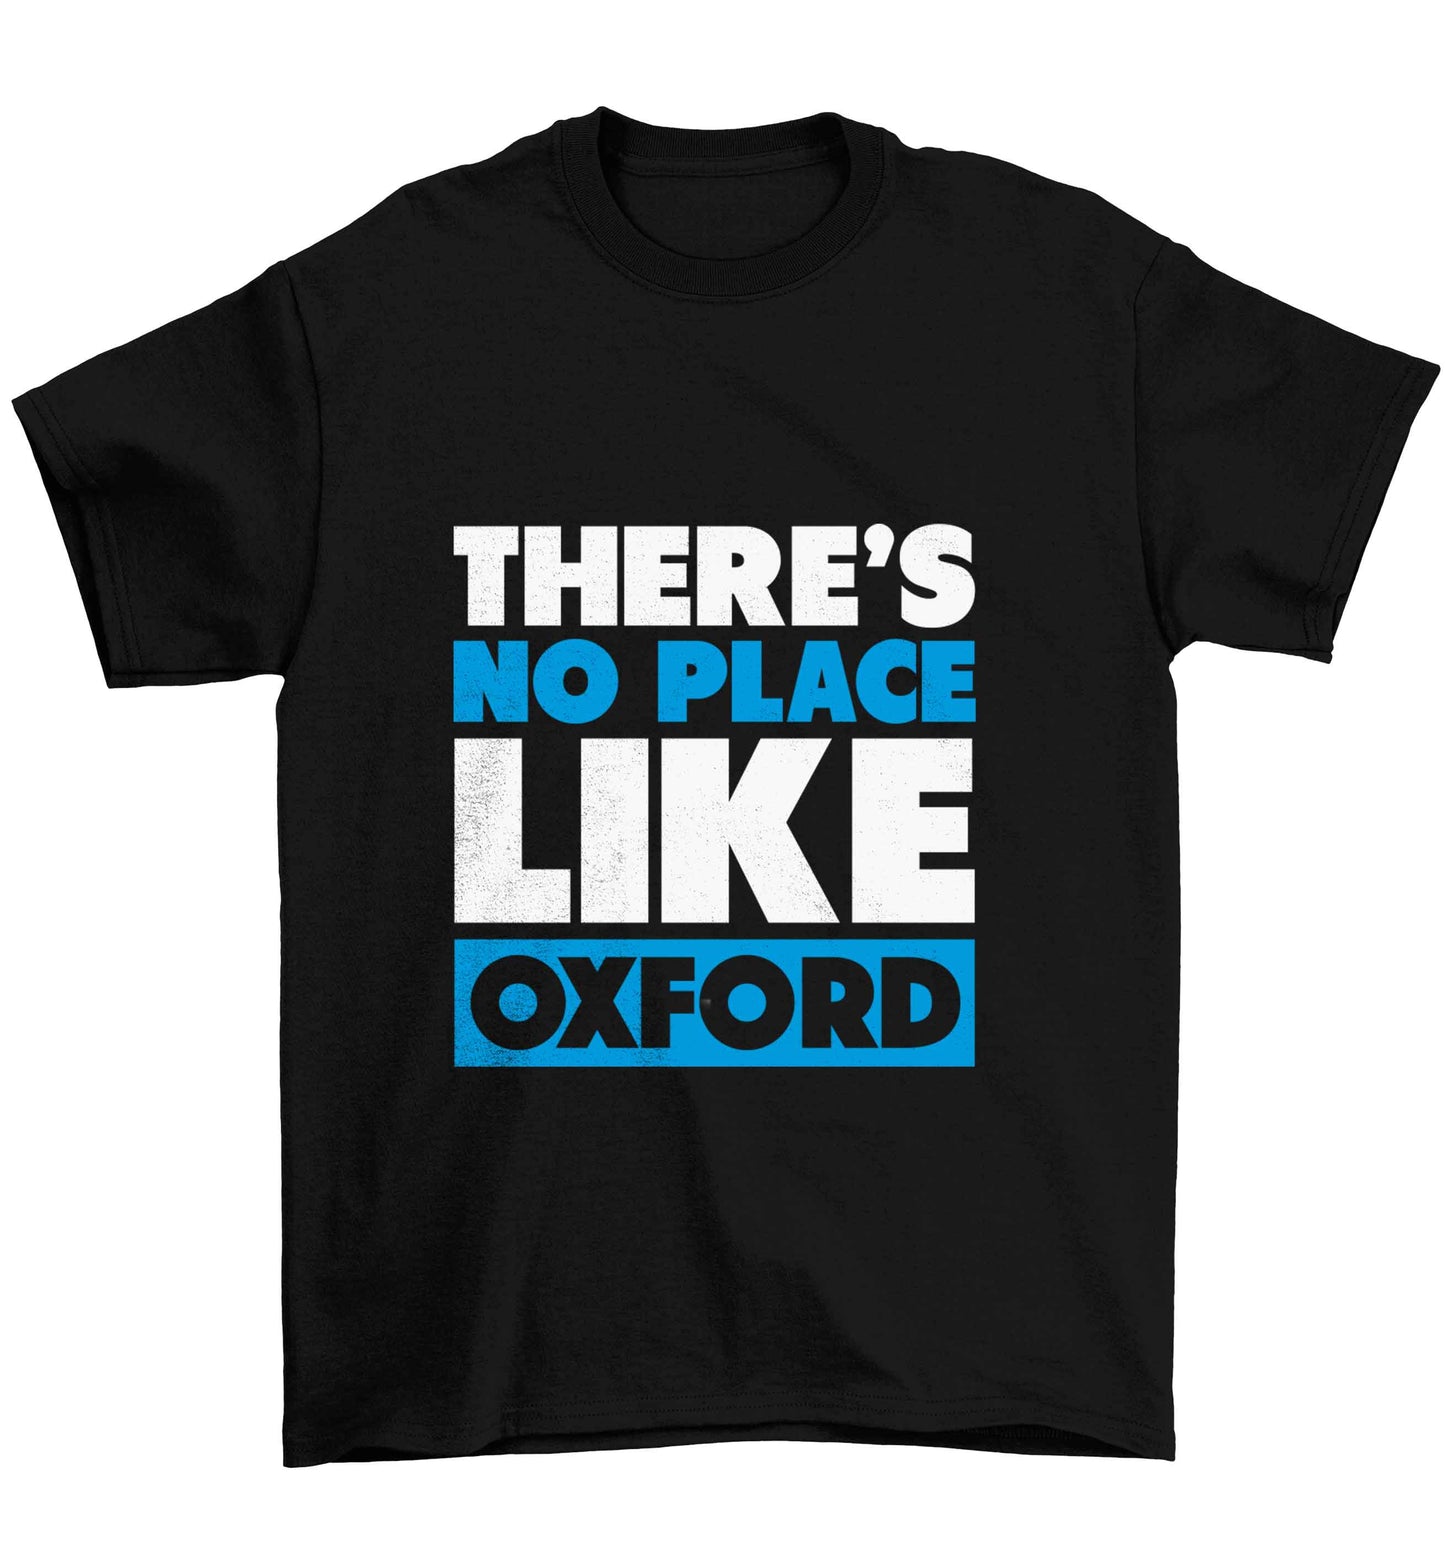 There's no place like Oxford Children's black Tshirt 12-13 Years